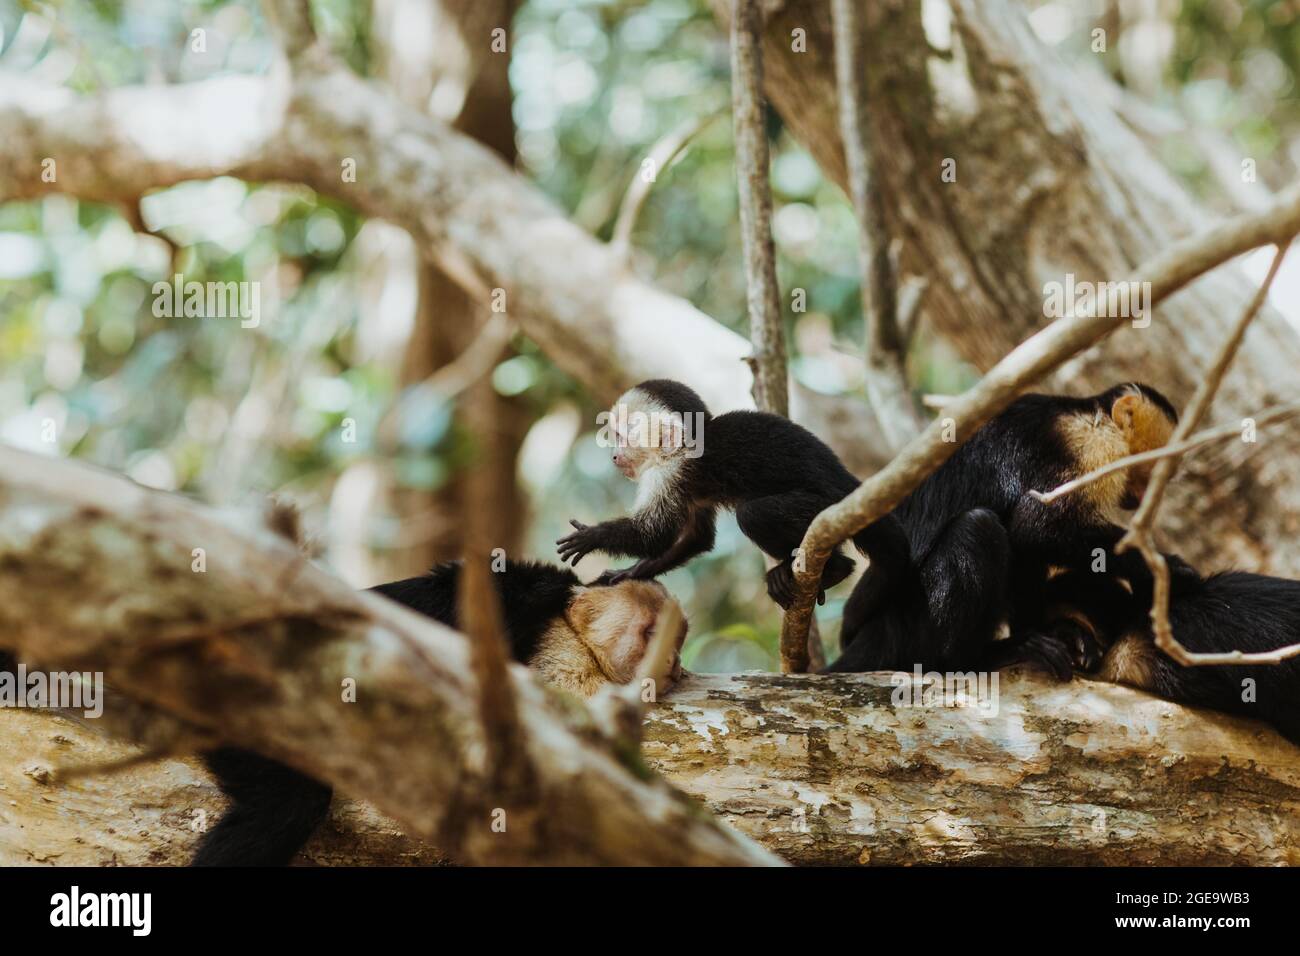 Group of wild Panamanian white faced capuchins monkeys playing and resting on large old tree branches in jungles of Costa Rica Stock Photo